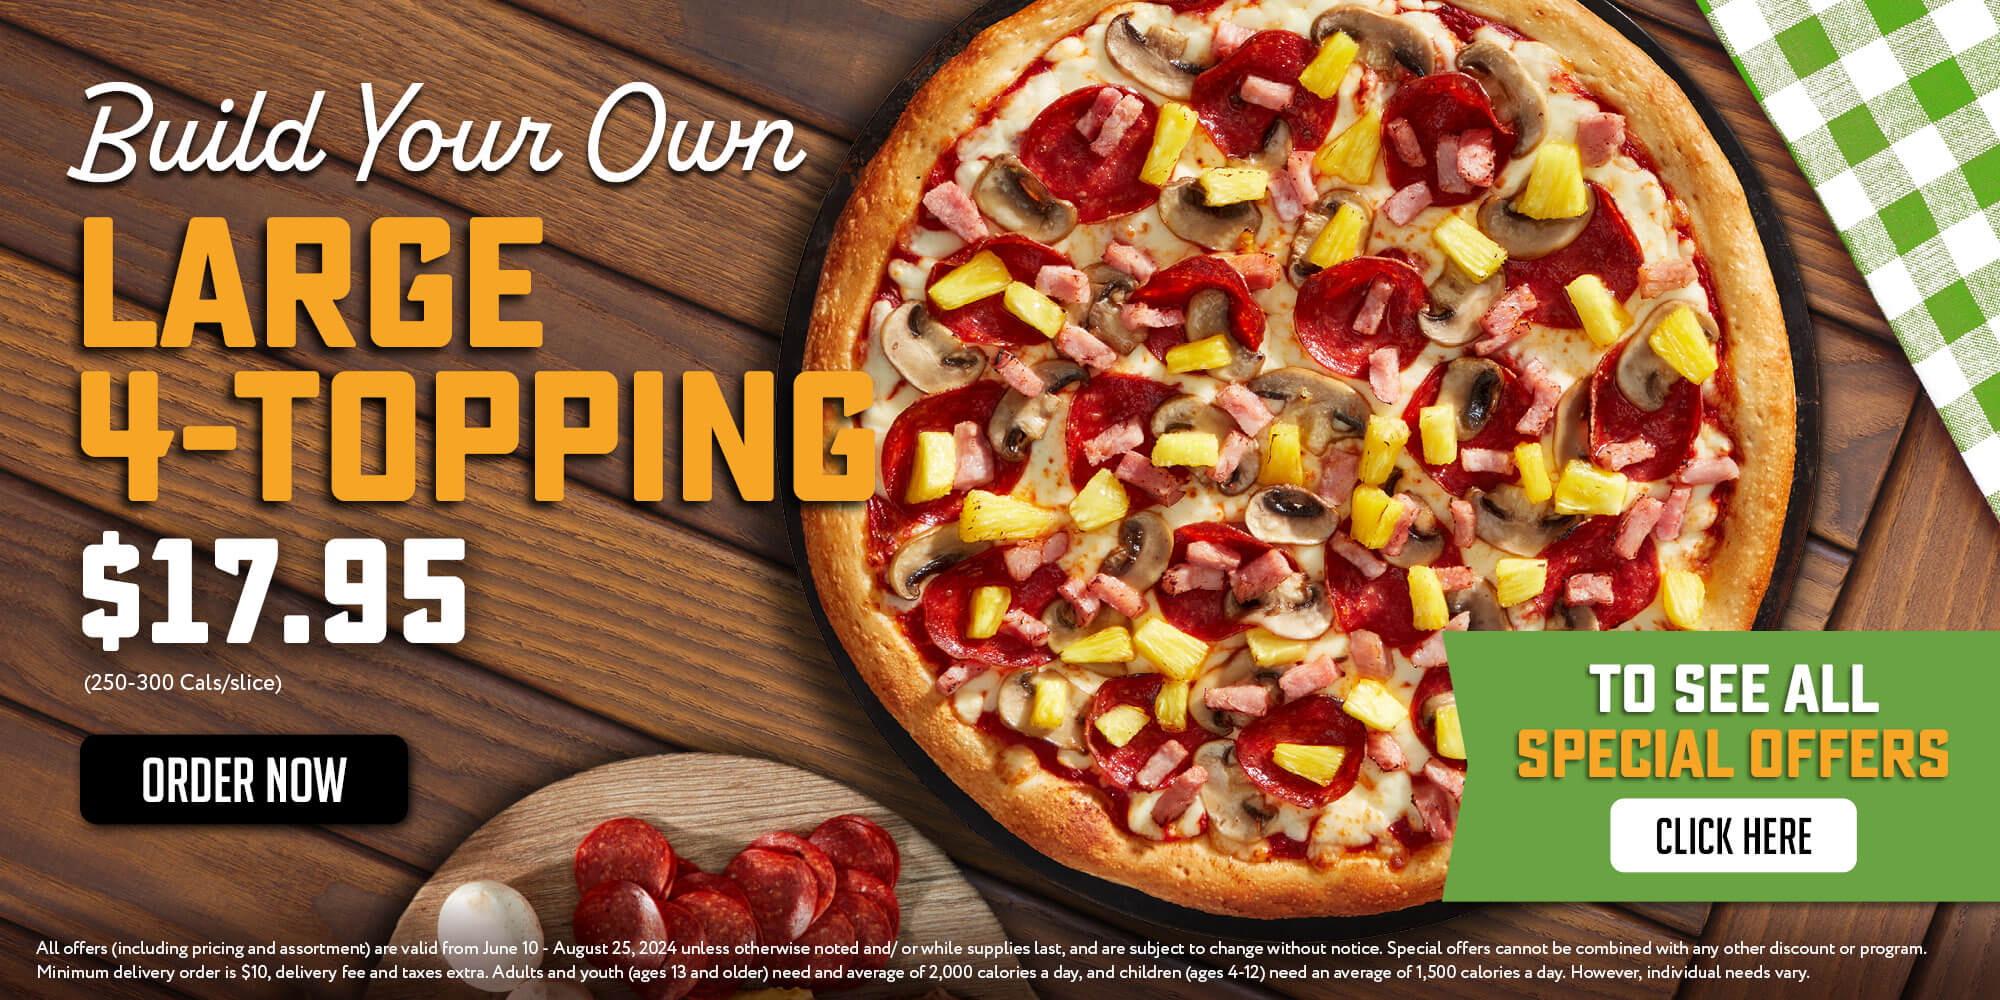 BYO Large 4 Toppings Pizza for $17.95